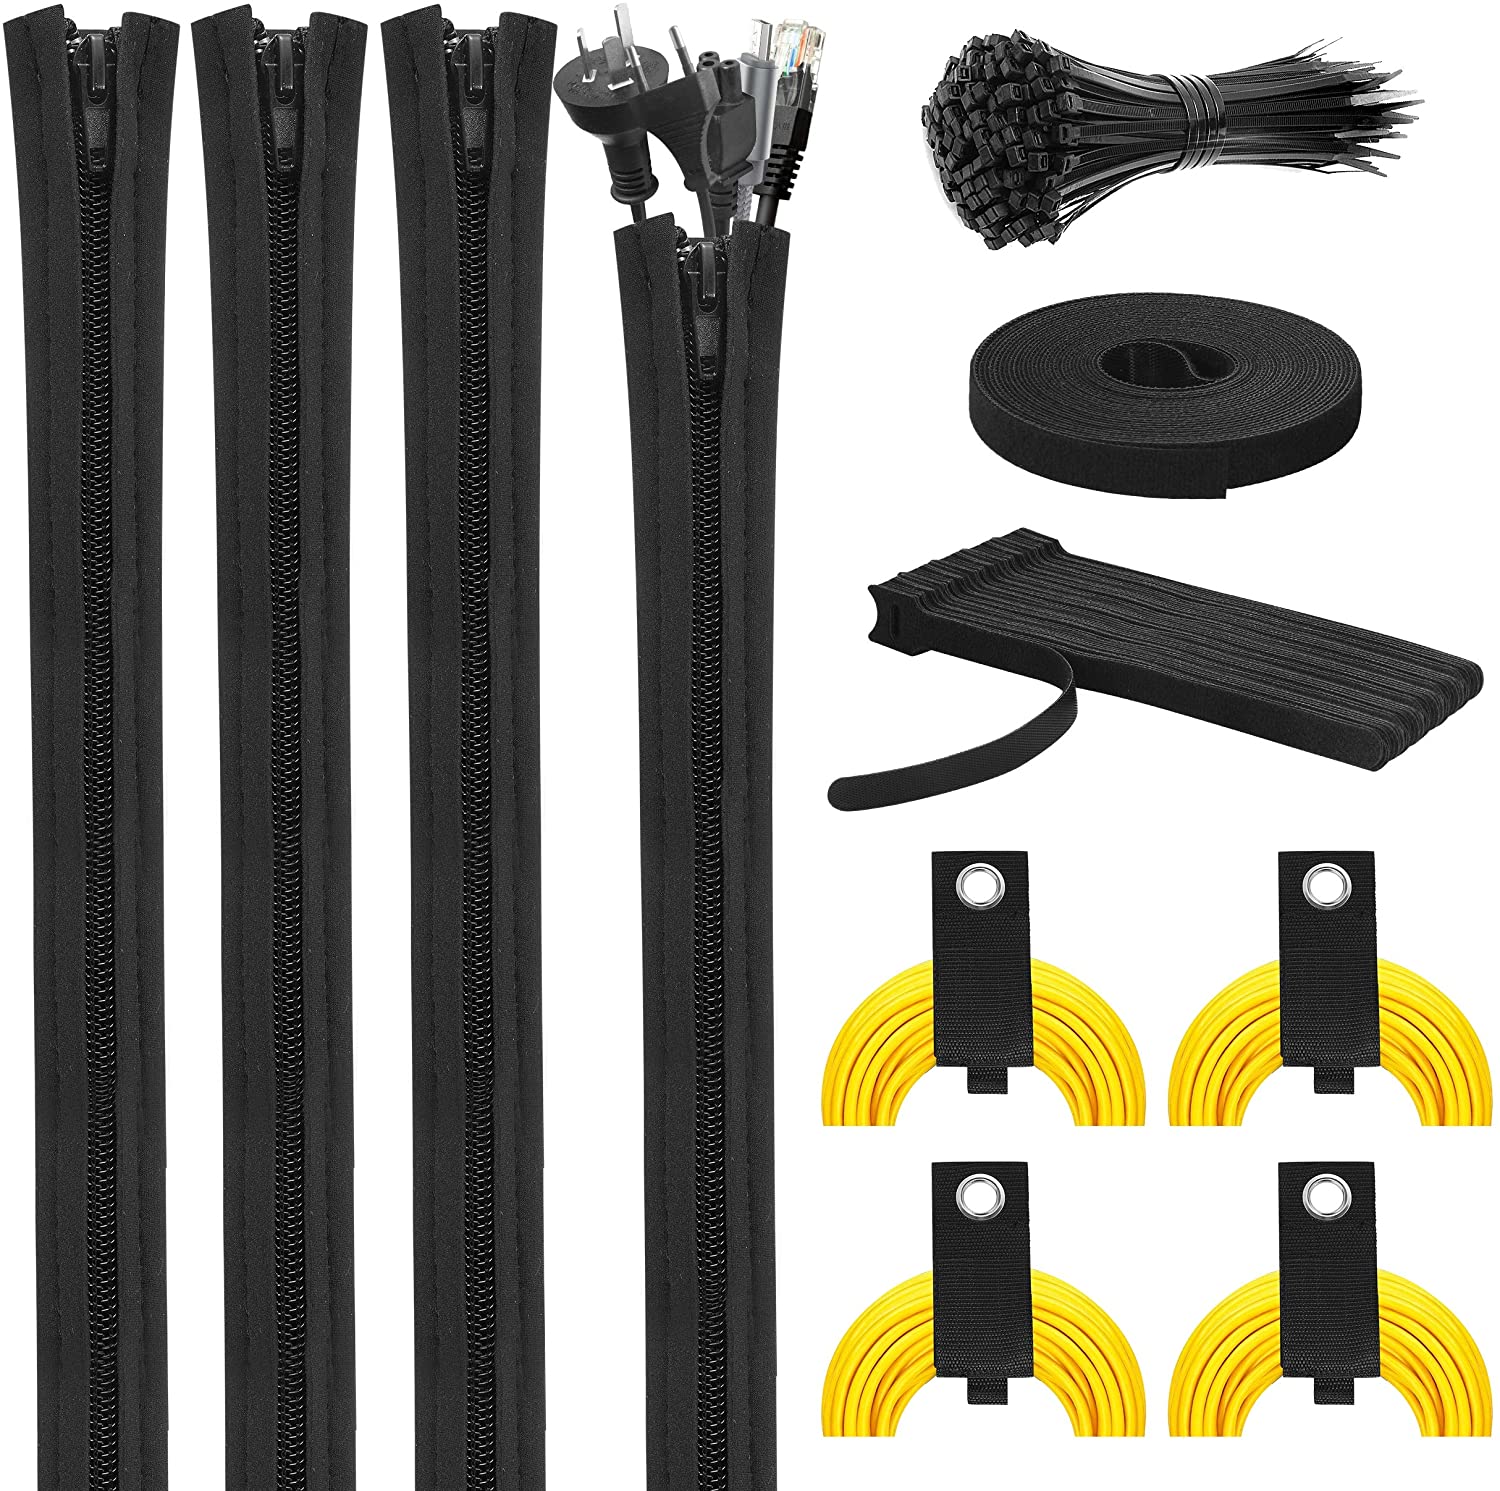 Office POKIENE 17pcs Cable Organizer Kit 3 Self-Adhesive Cable Ties for Home 4 Cable Sleeves with Zipper Cable Management Organizer Including 10 Cable Holder Clips